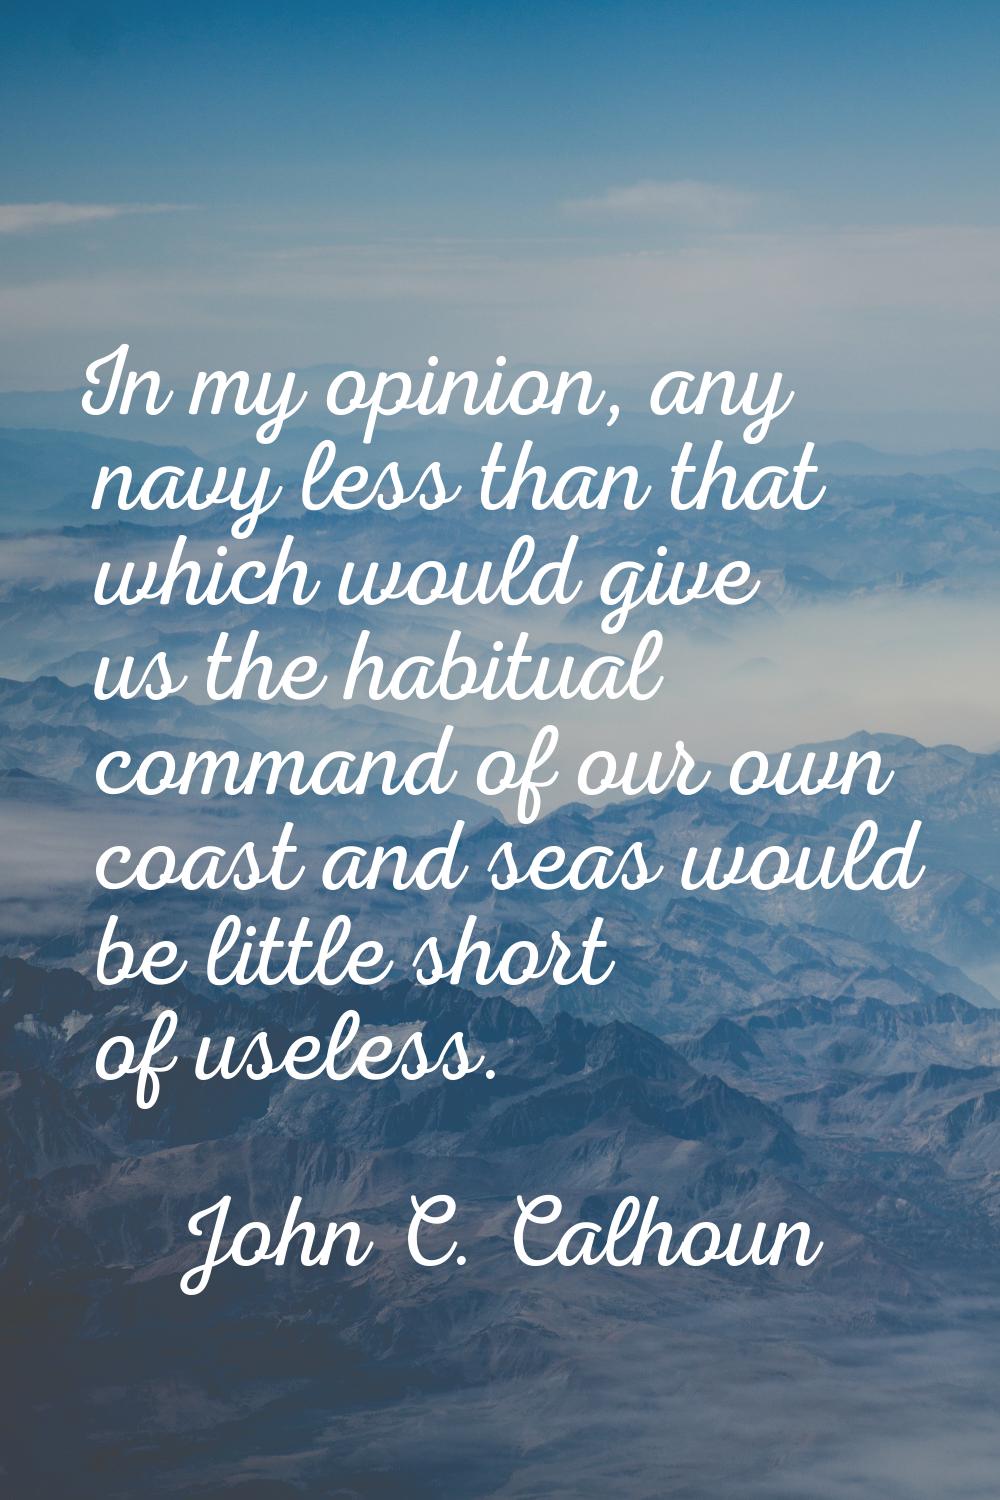 In my opinion, any navy less than that which would give us the habitual command of our own coast an